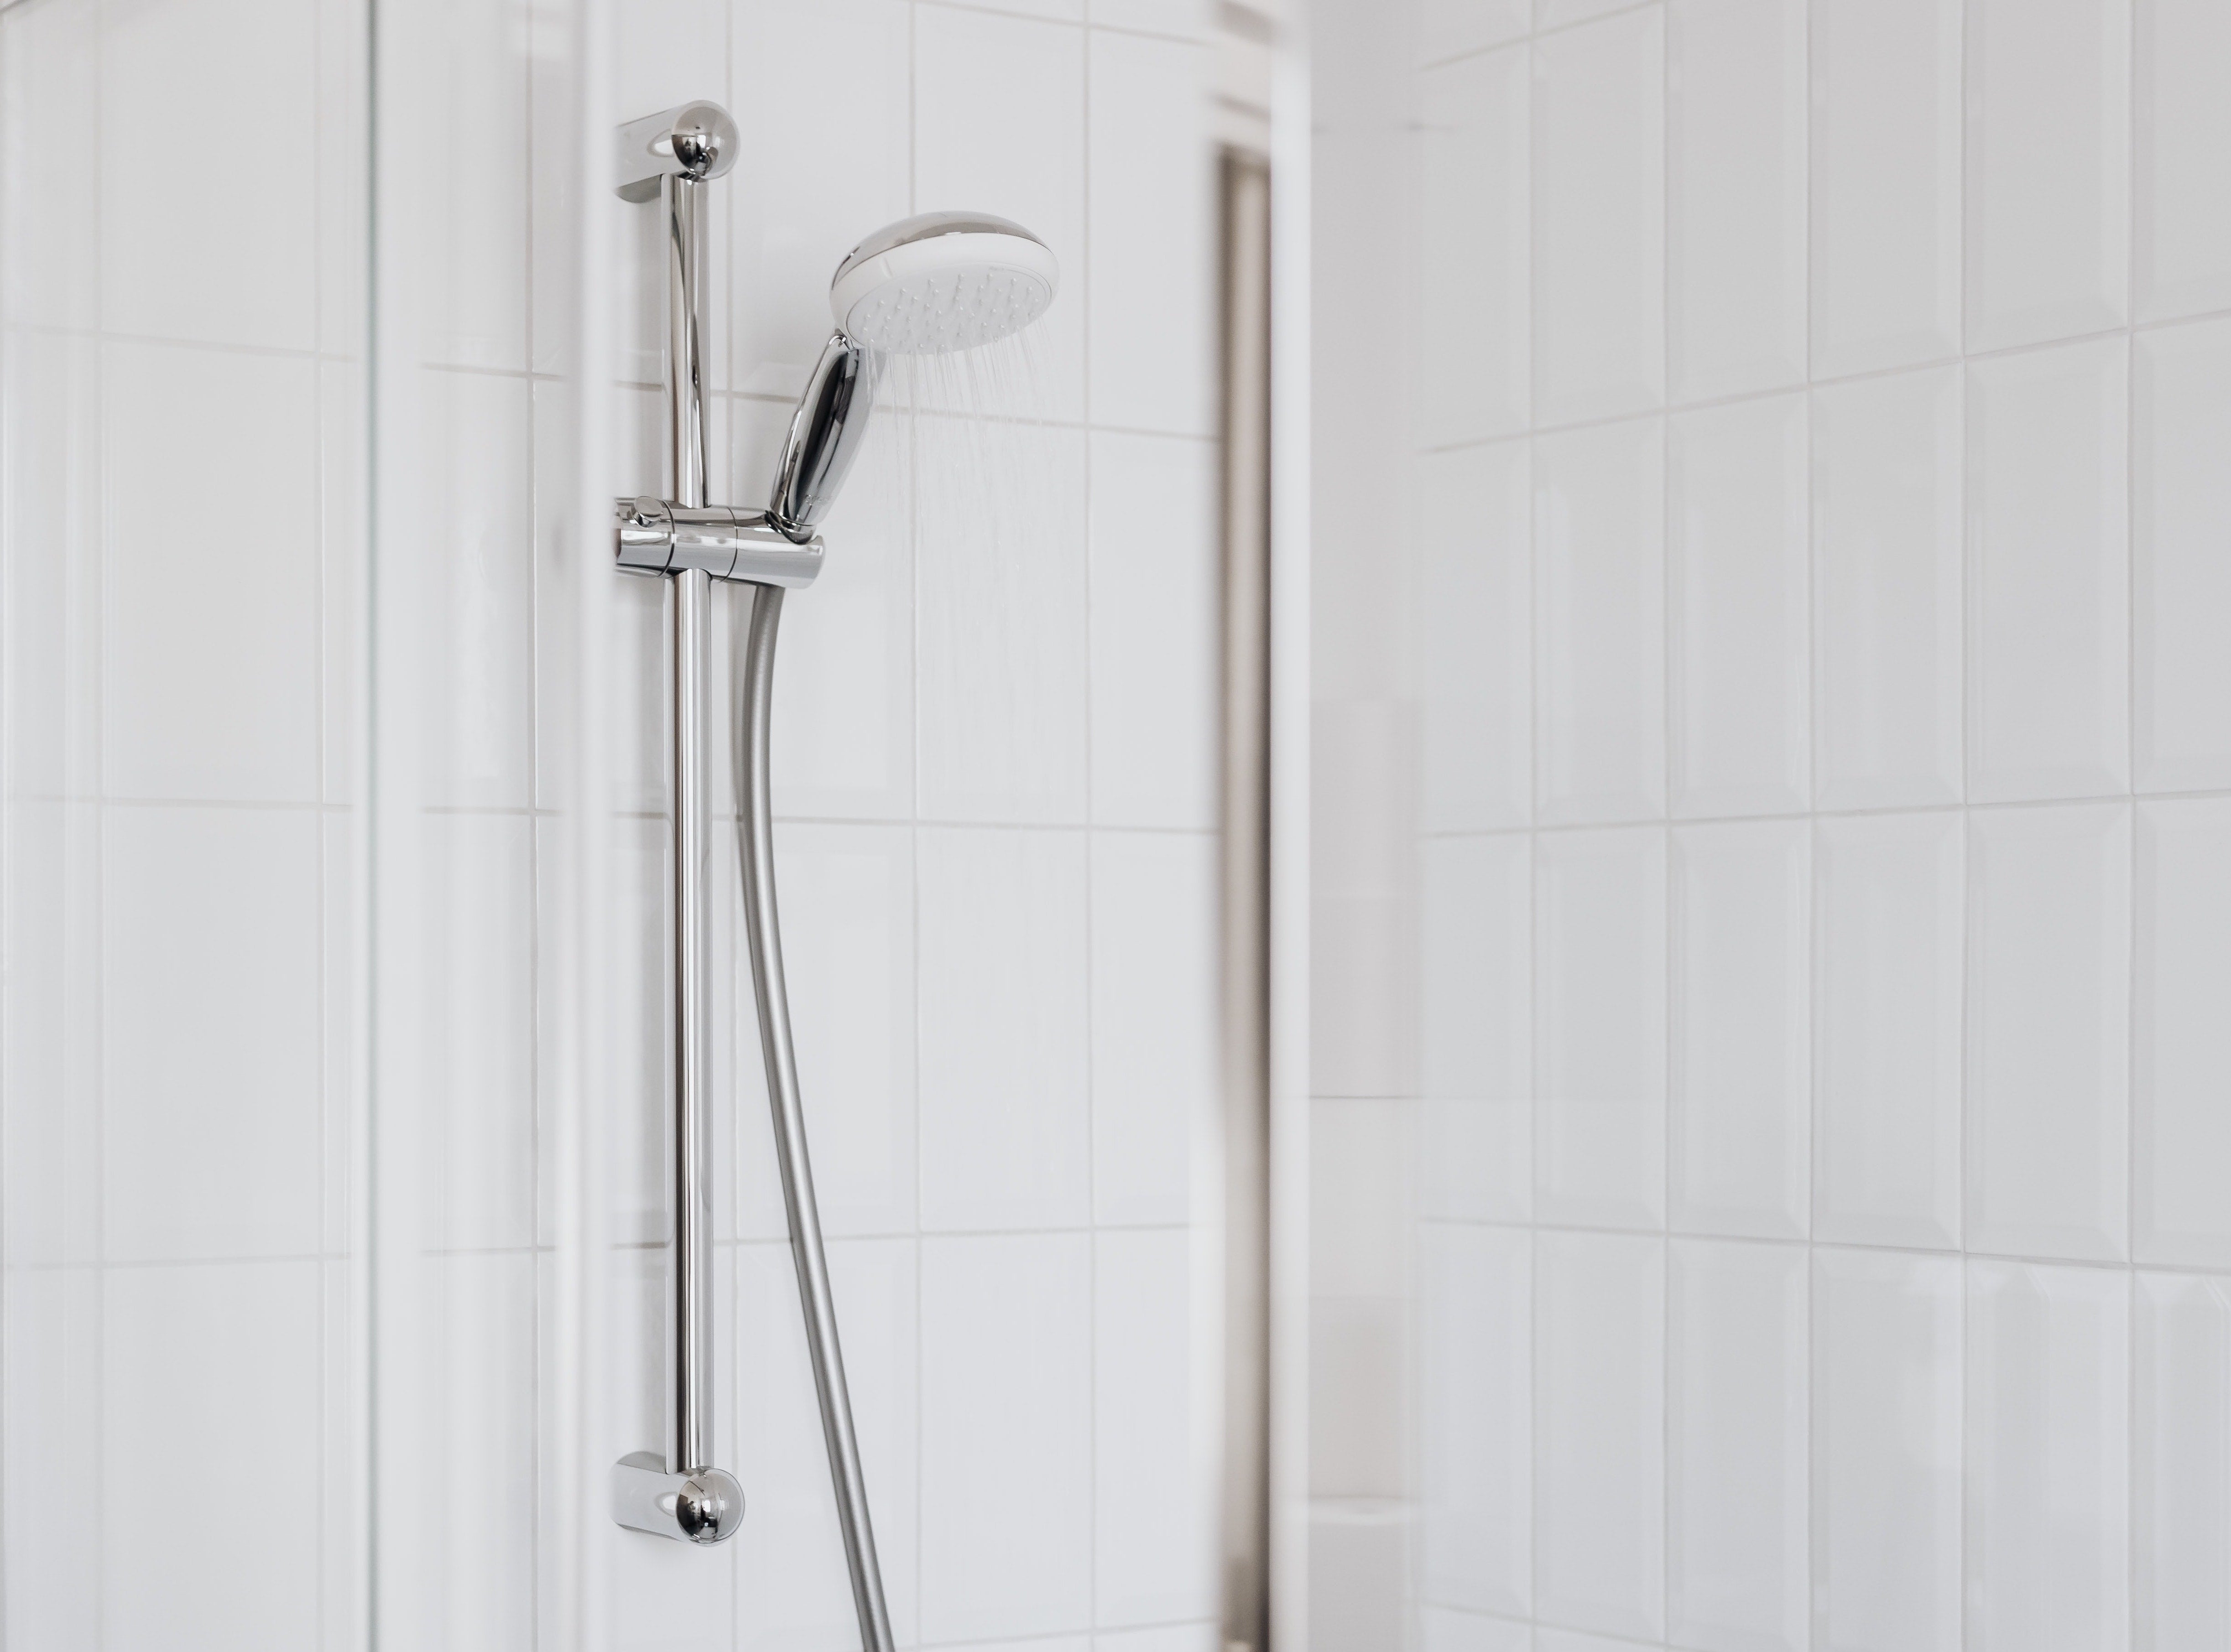 How To Incrase Water Pressure In Shower